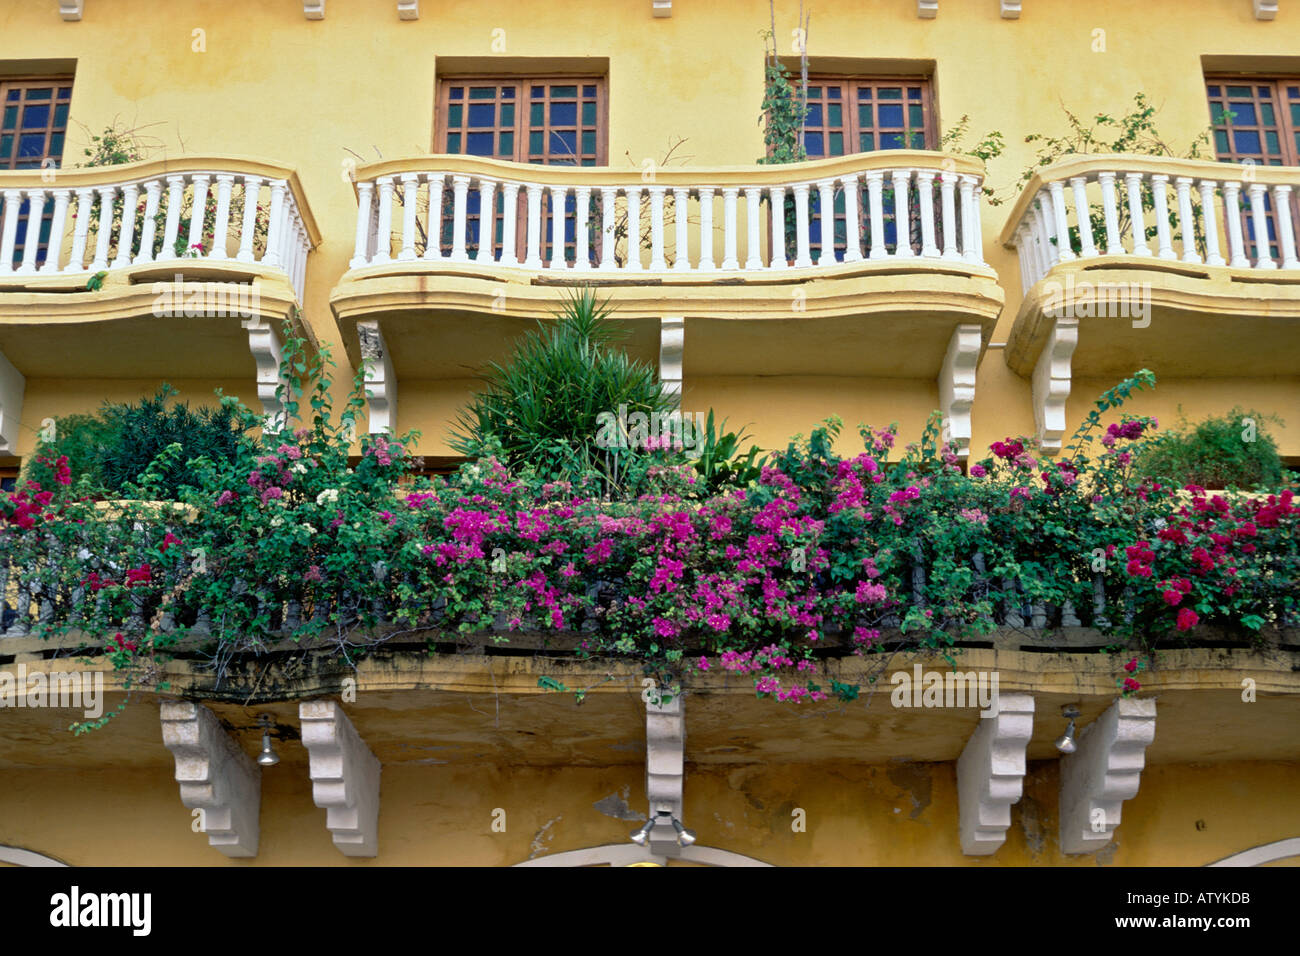 Detail of a building with curved balconies in Old Town Cartagena Colombia Stock Photo